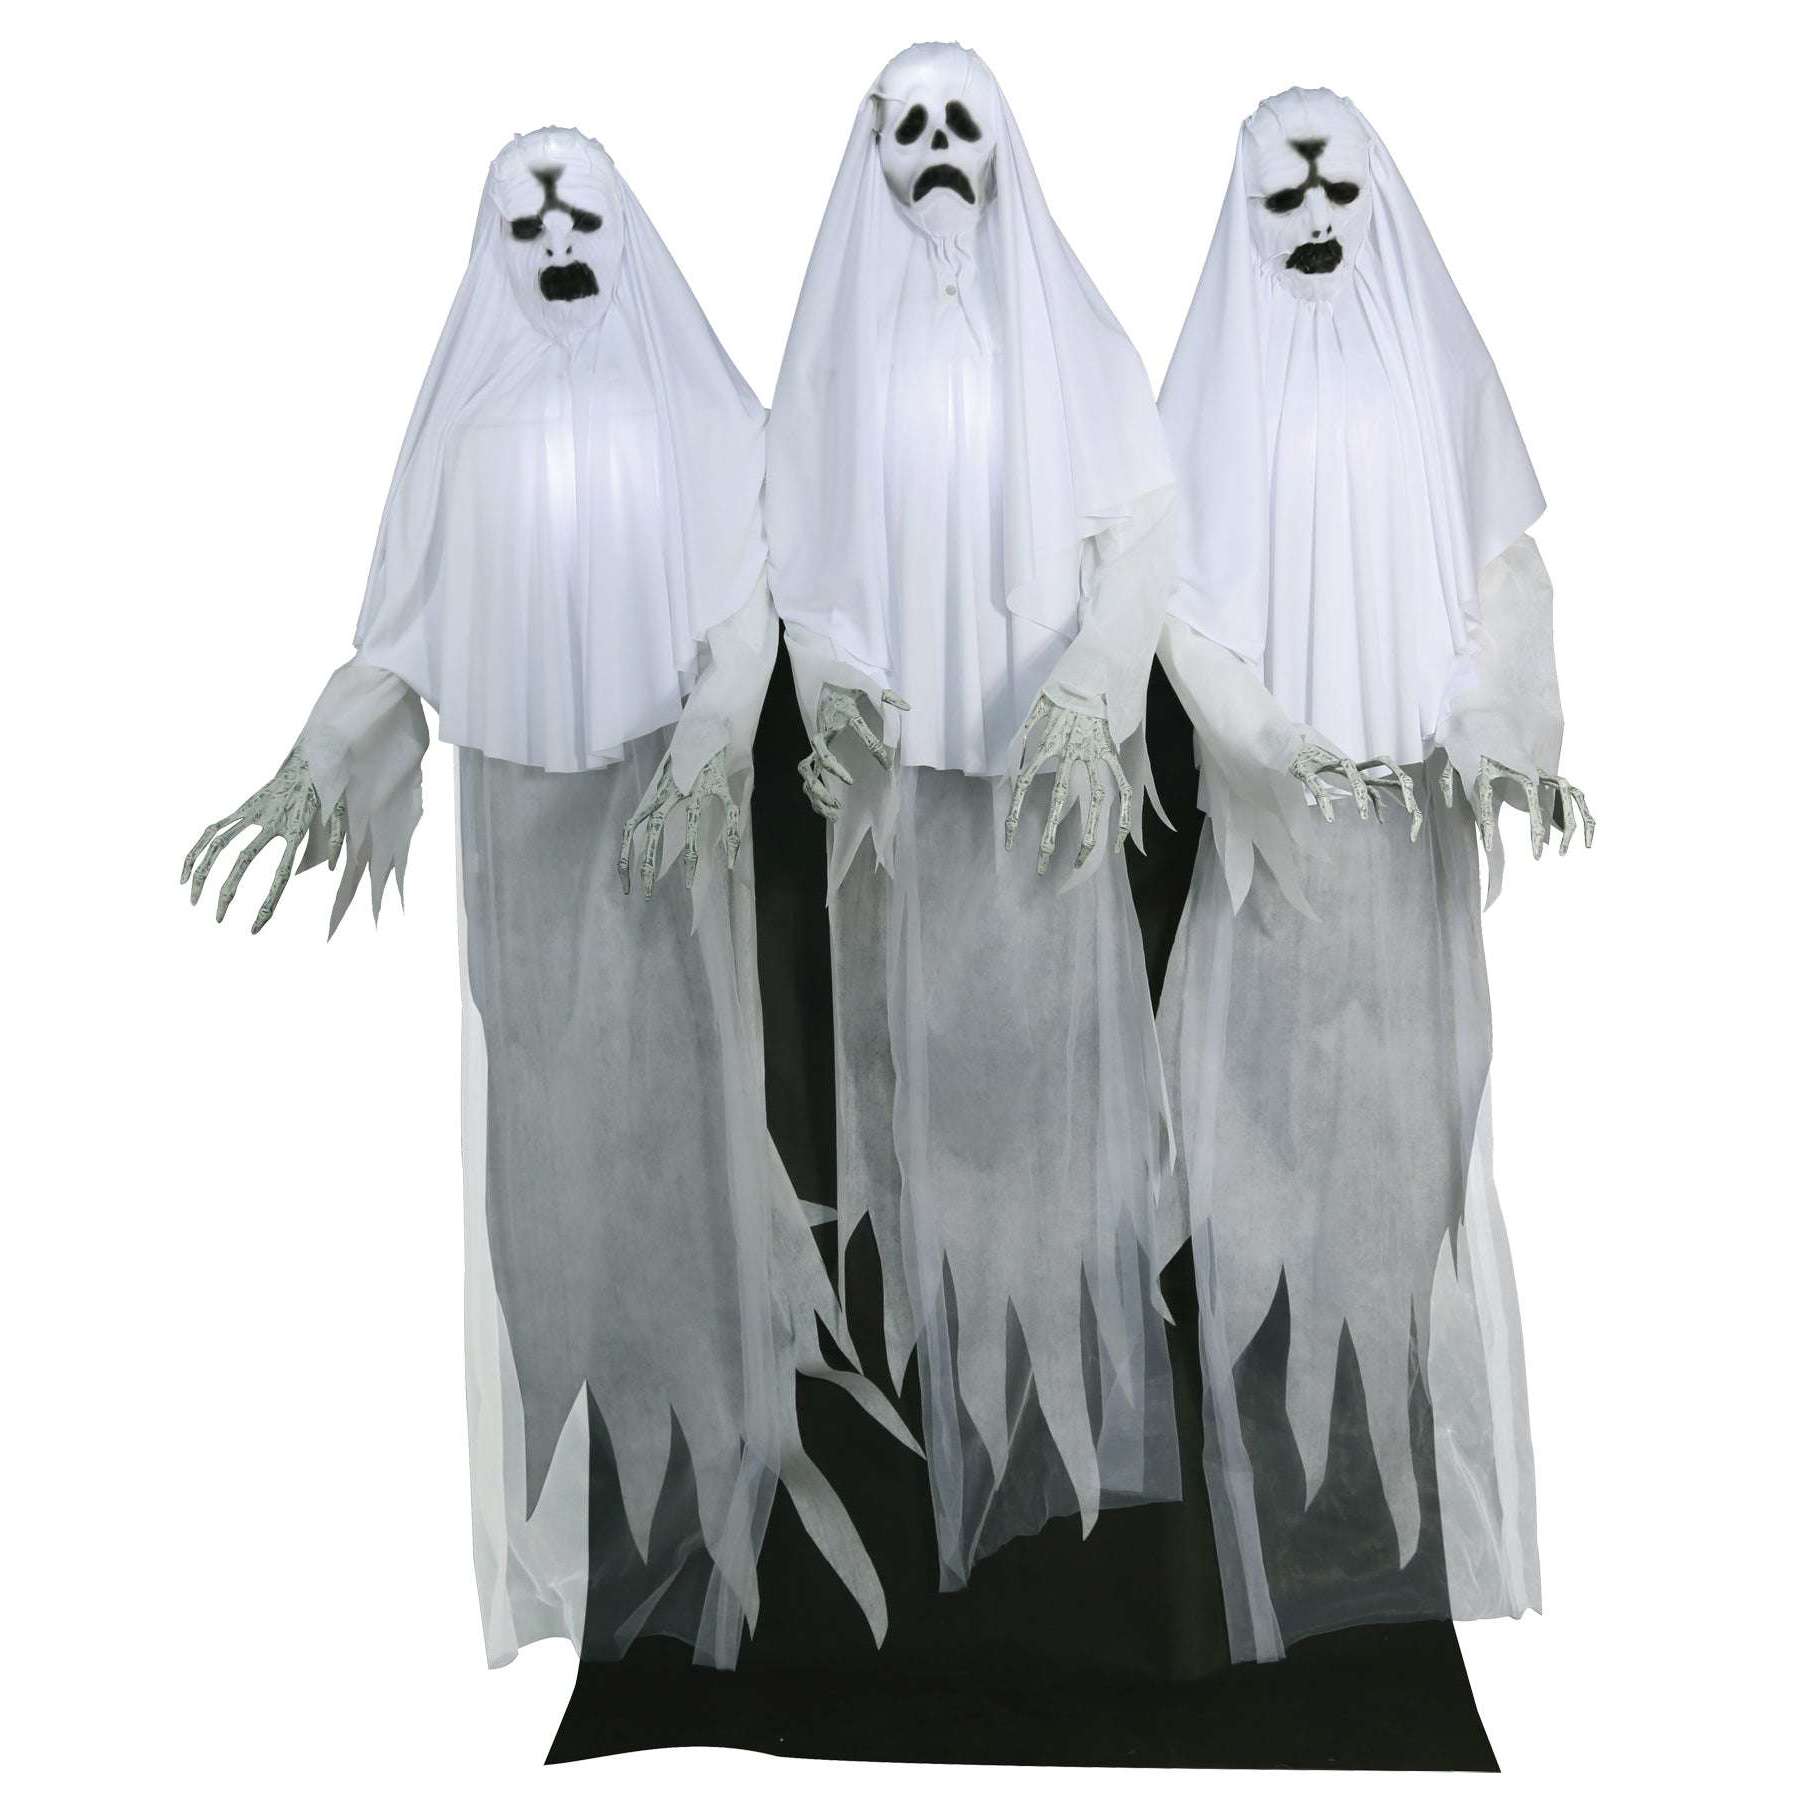 6' Haunting Ghost Trio Animated Prop Decoration